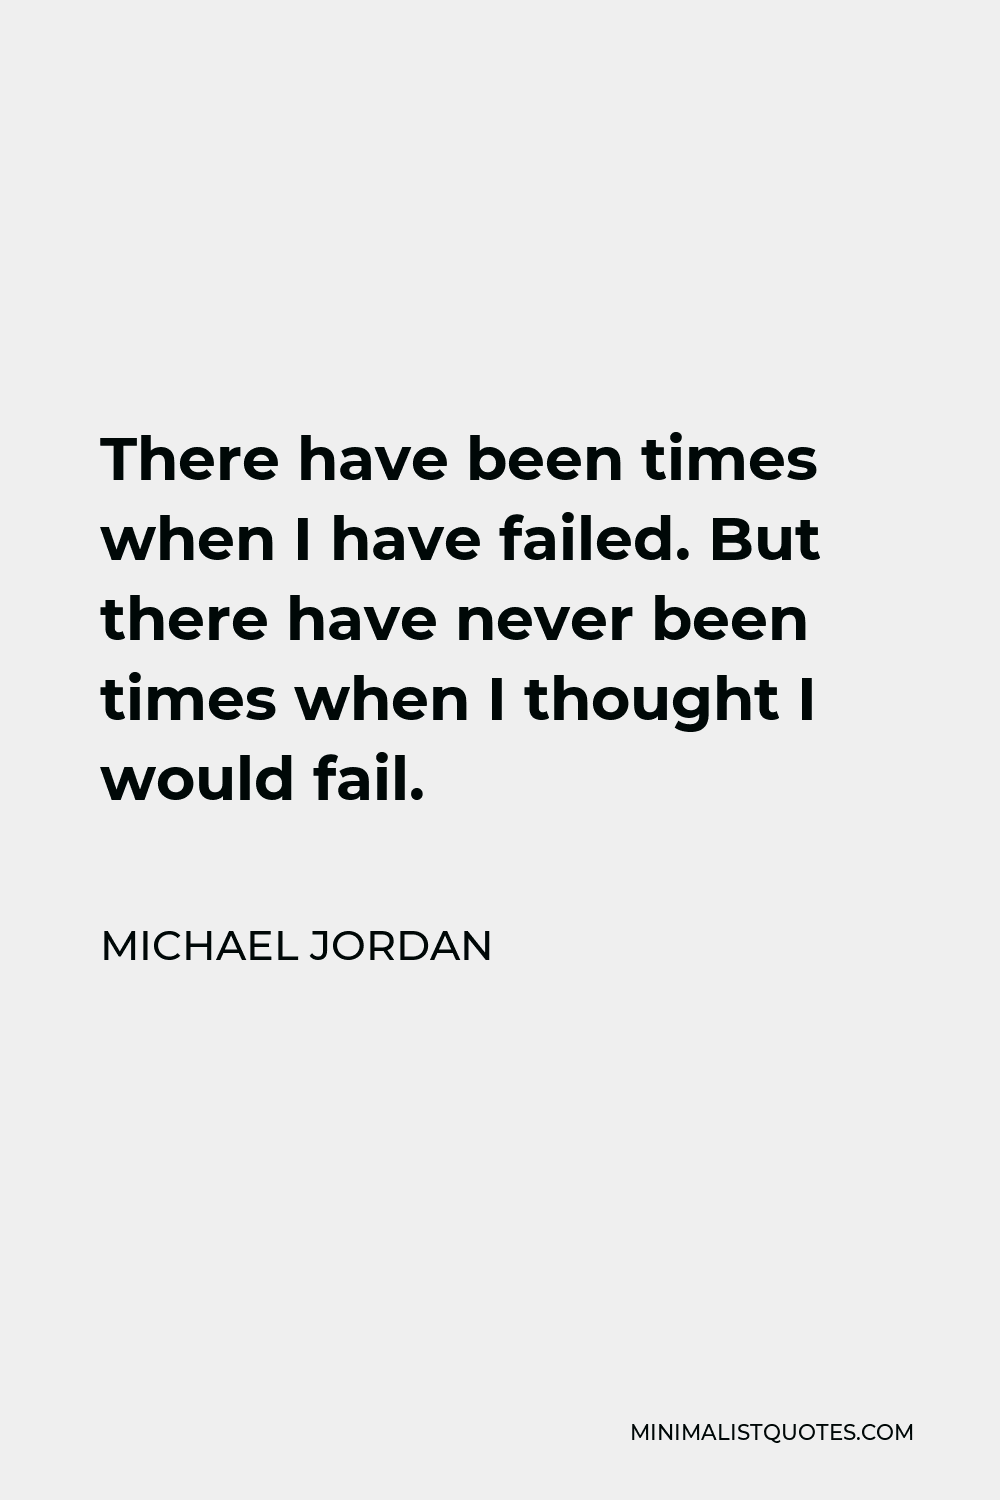 Michael Jordan Quote - There have been times when I have failed. But there have never been times when I thought I would fail.